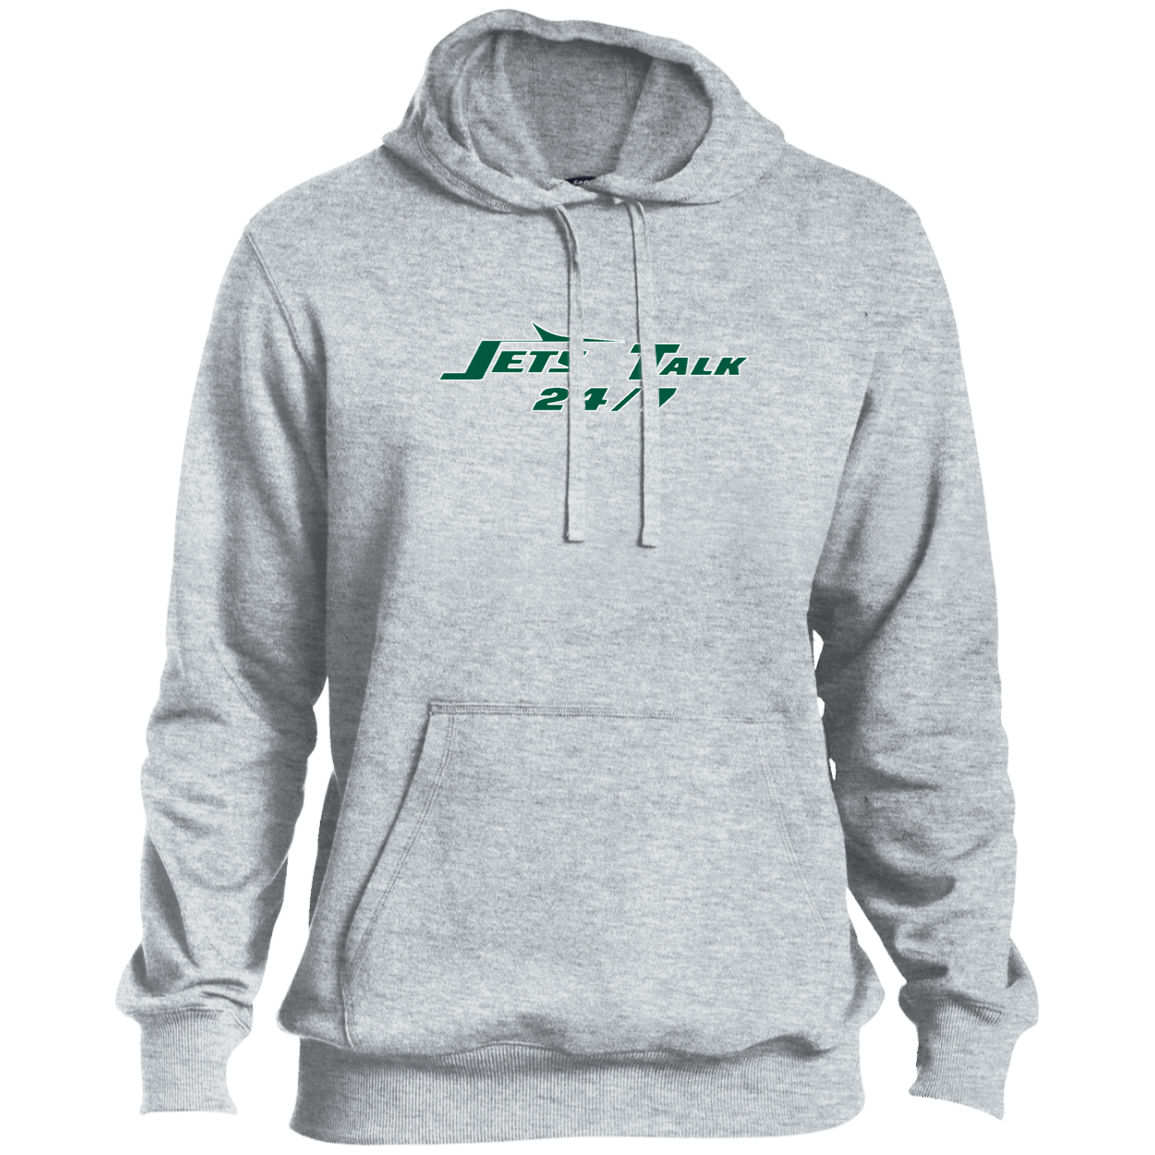 EJECTED! - Pullover Hoodie